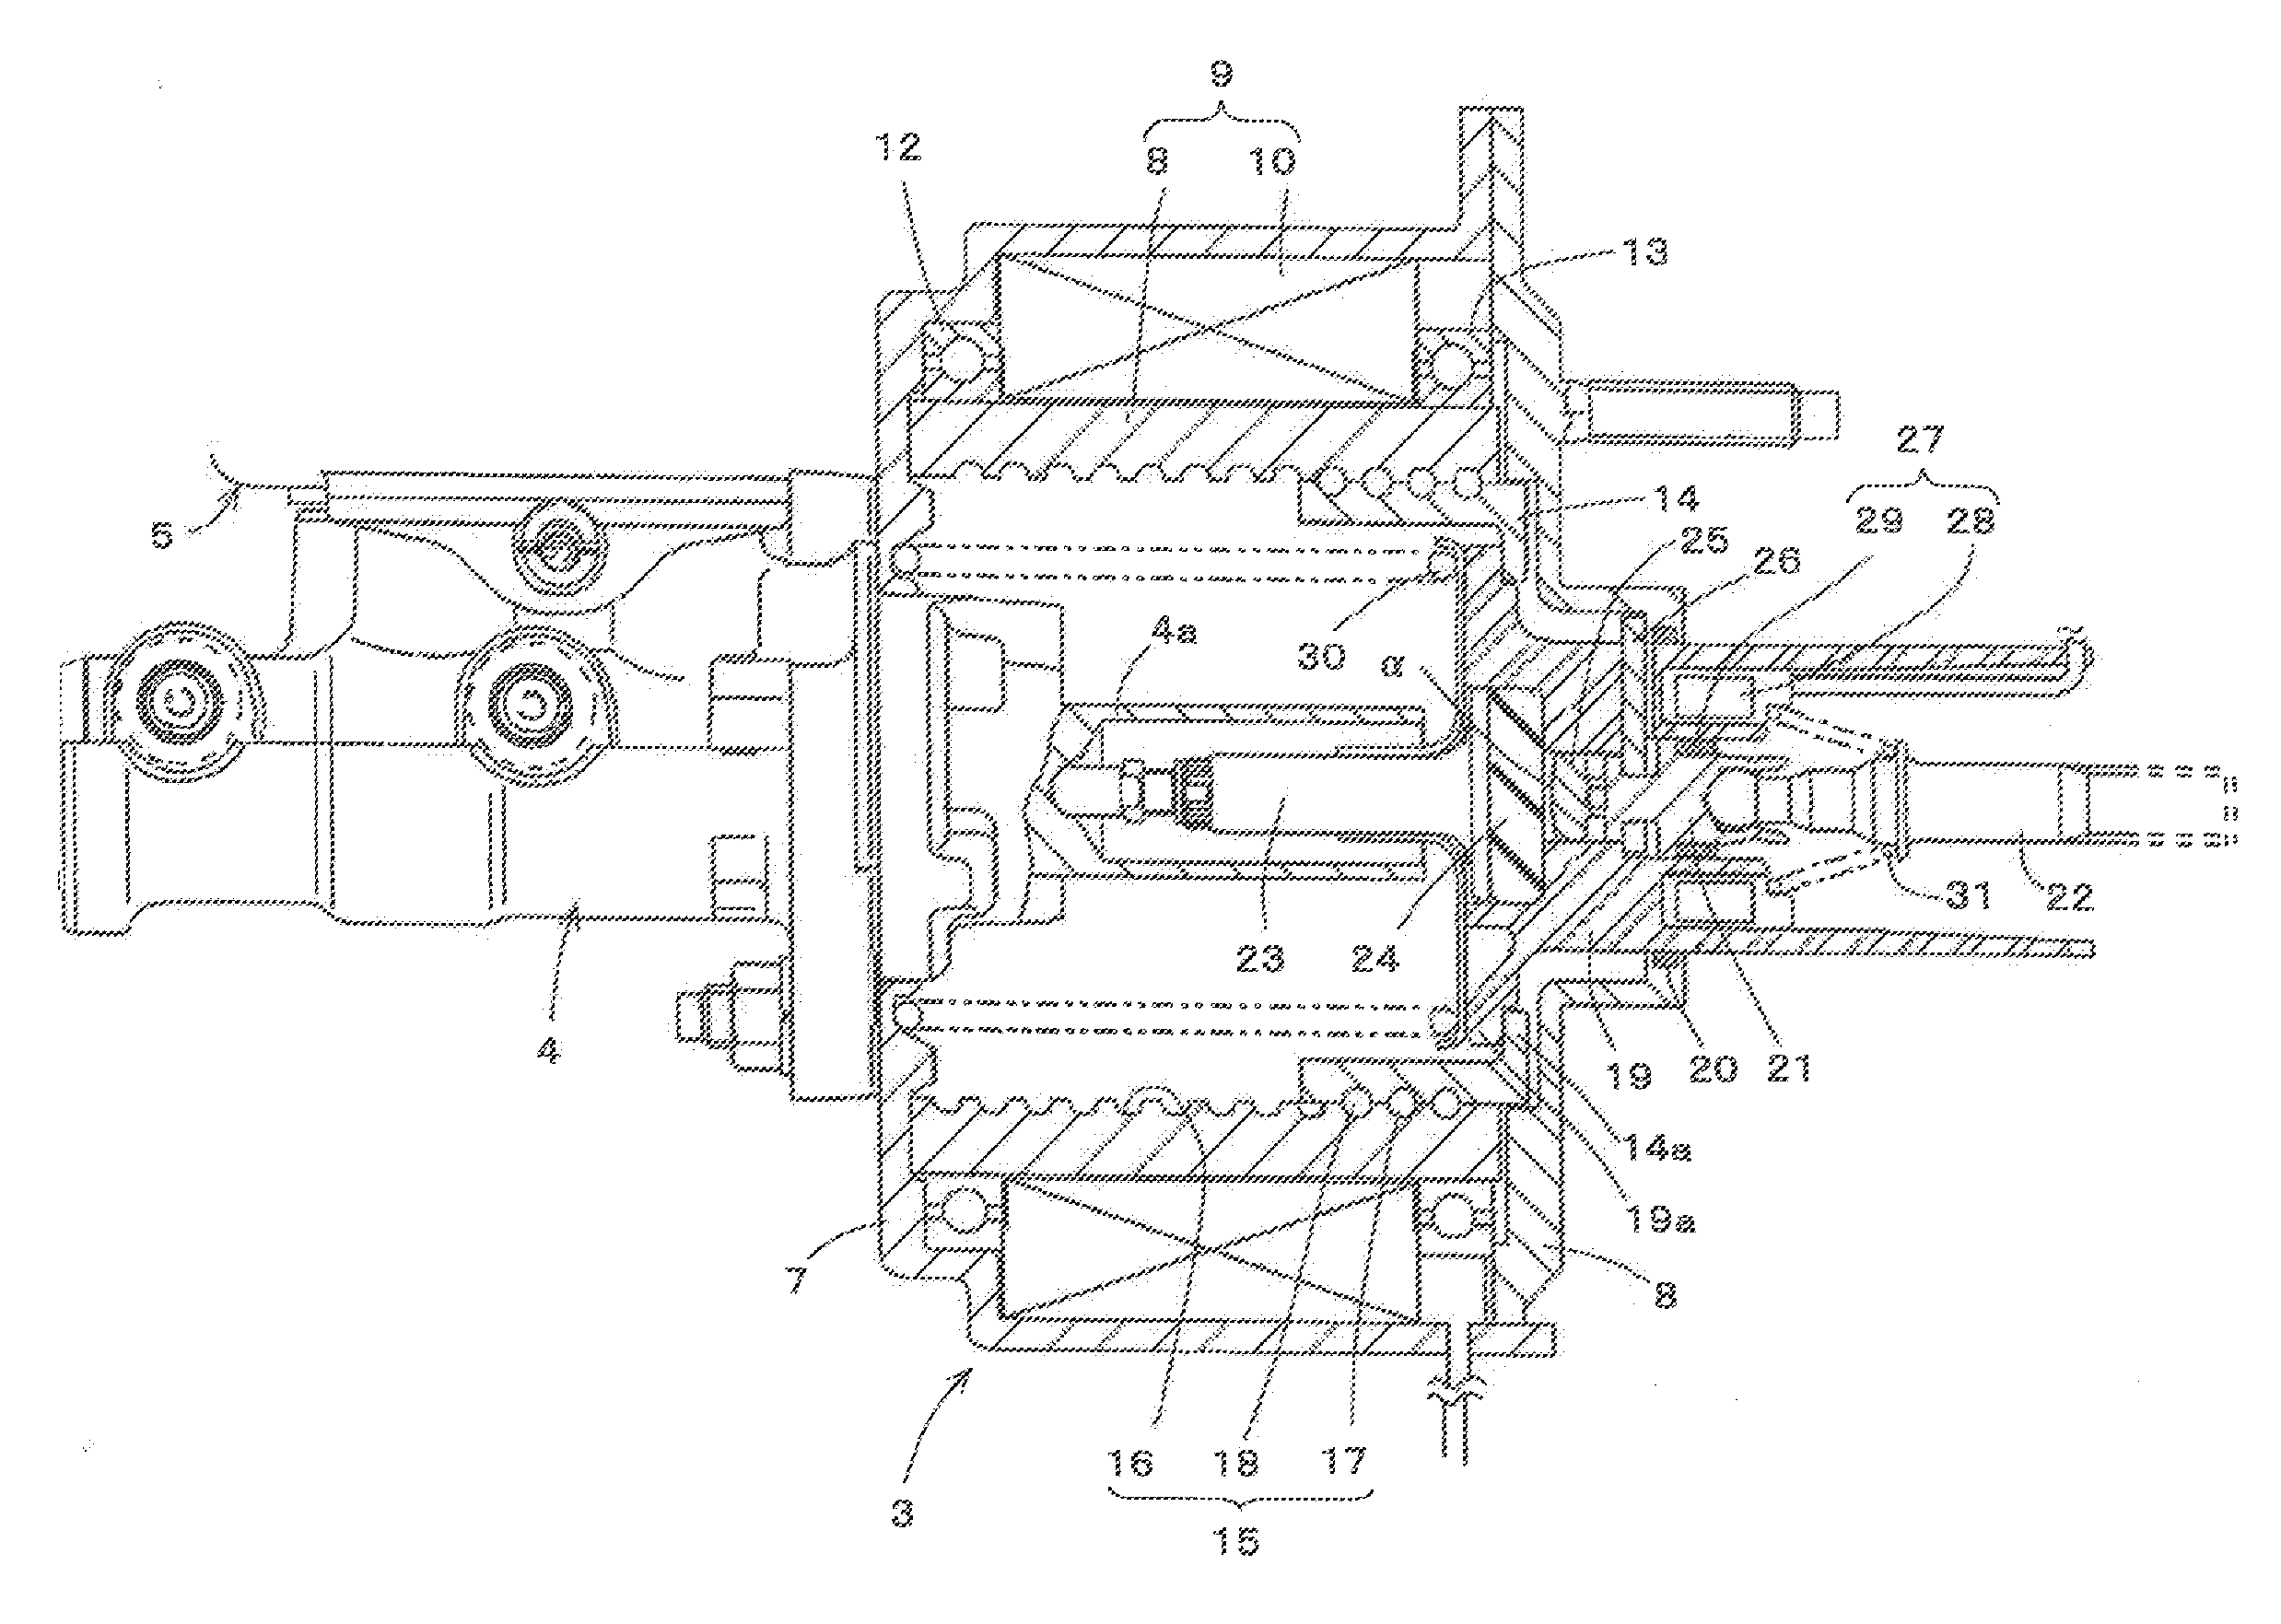 Electric booster and brake device using the same